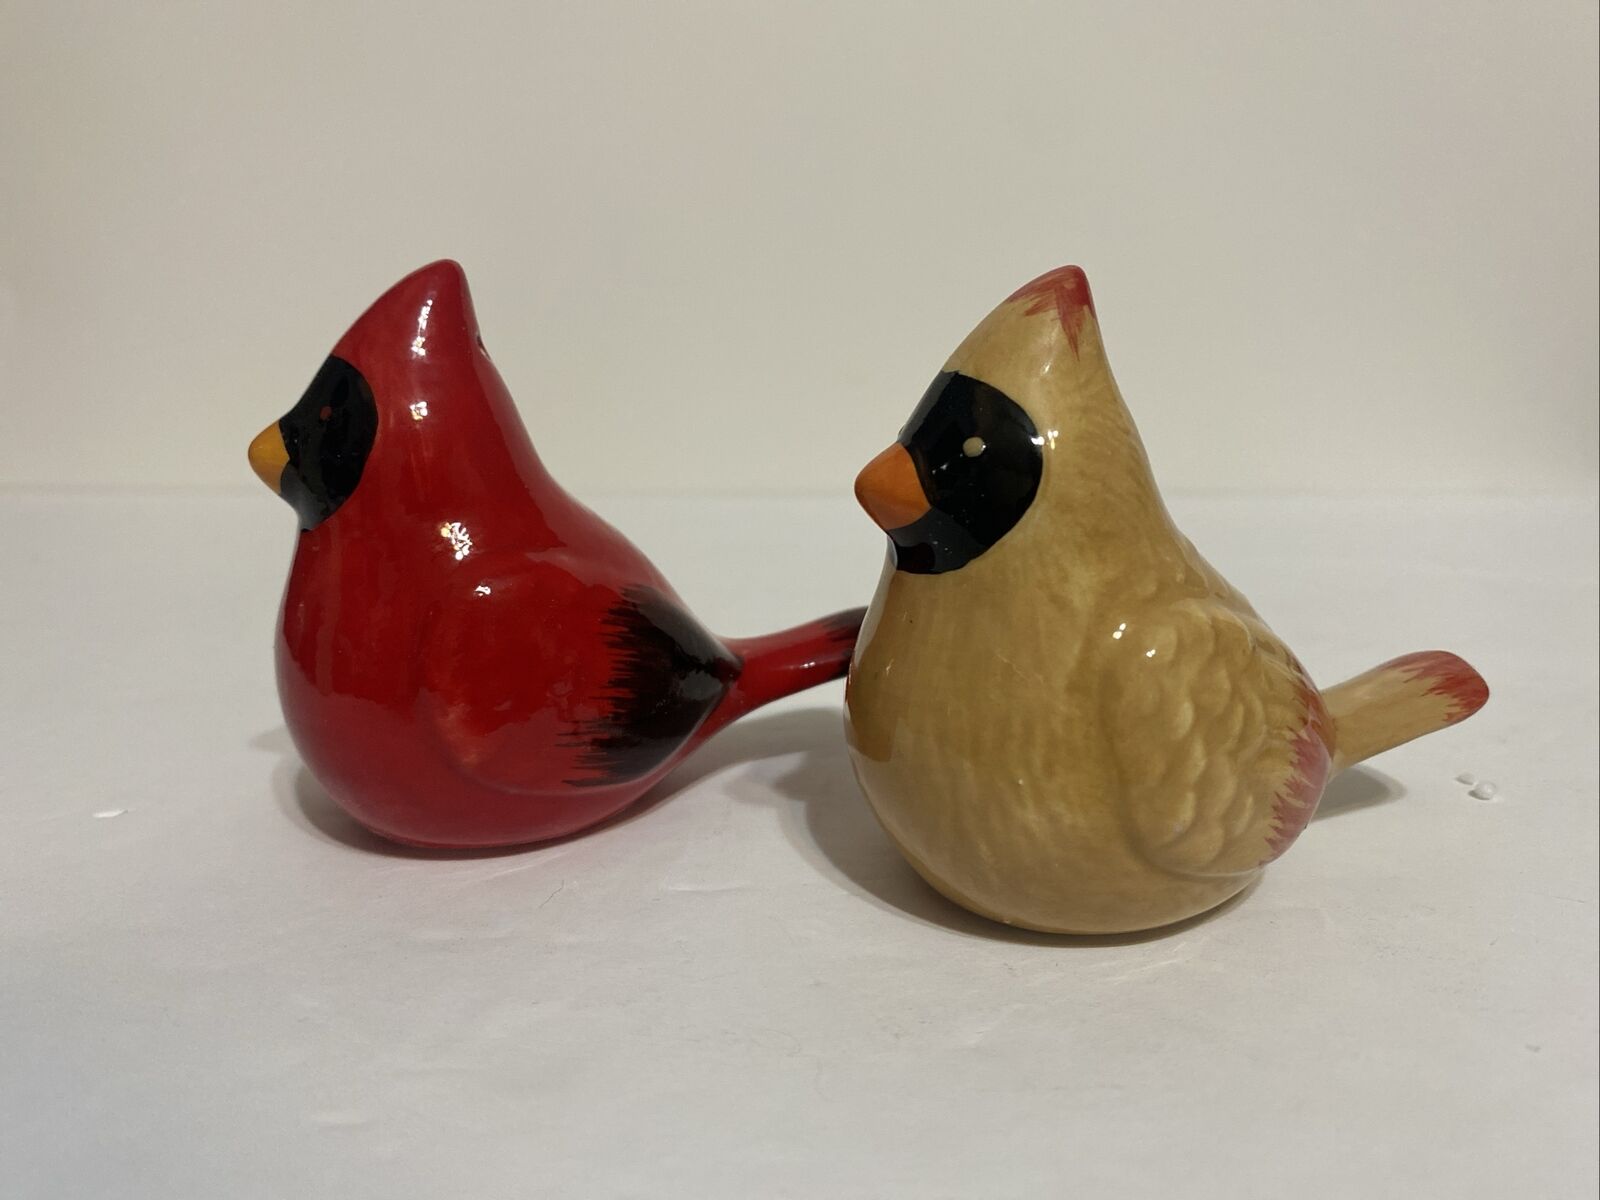 Hallmark Cardinals Salt and Pepper Shakers Male and Female Perfect Condition.